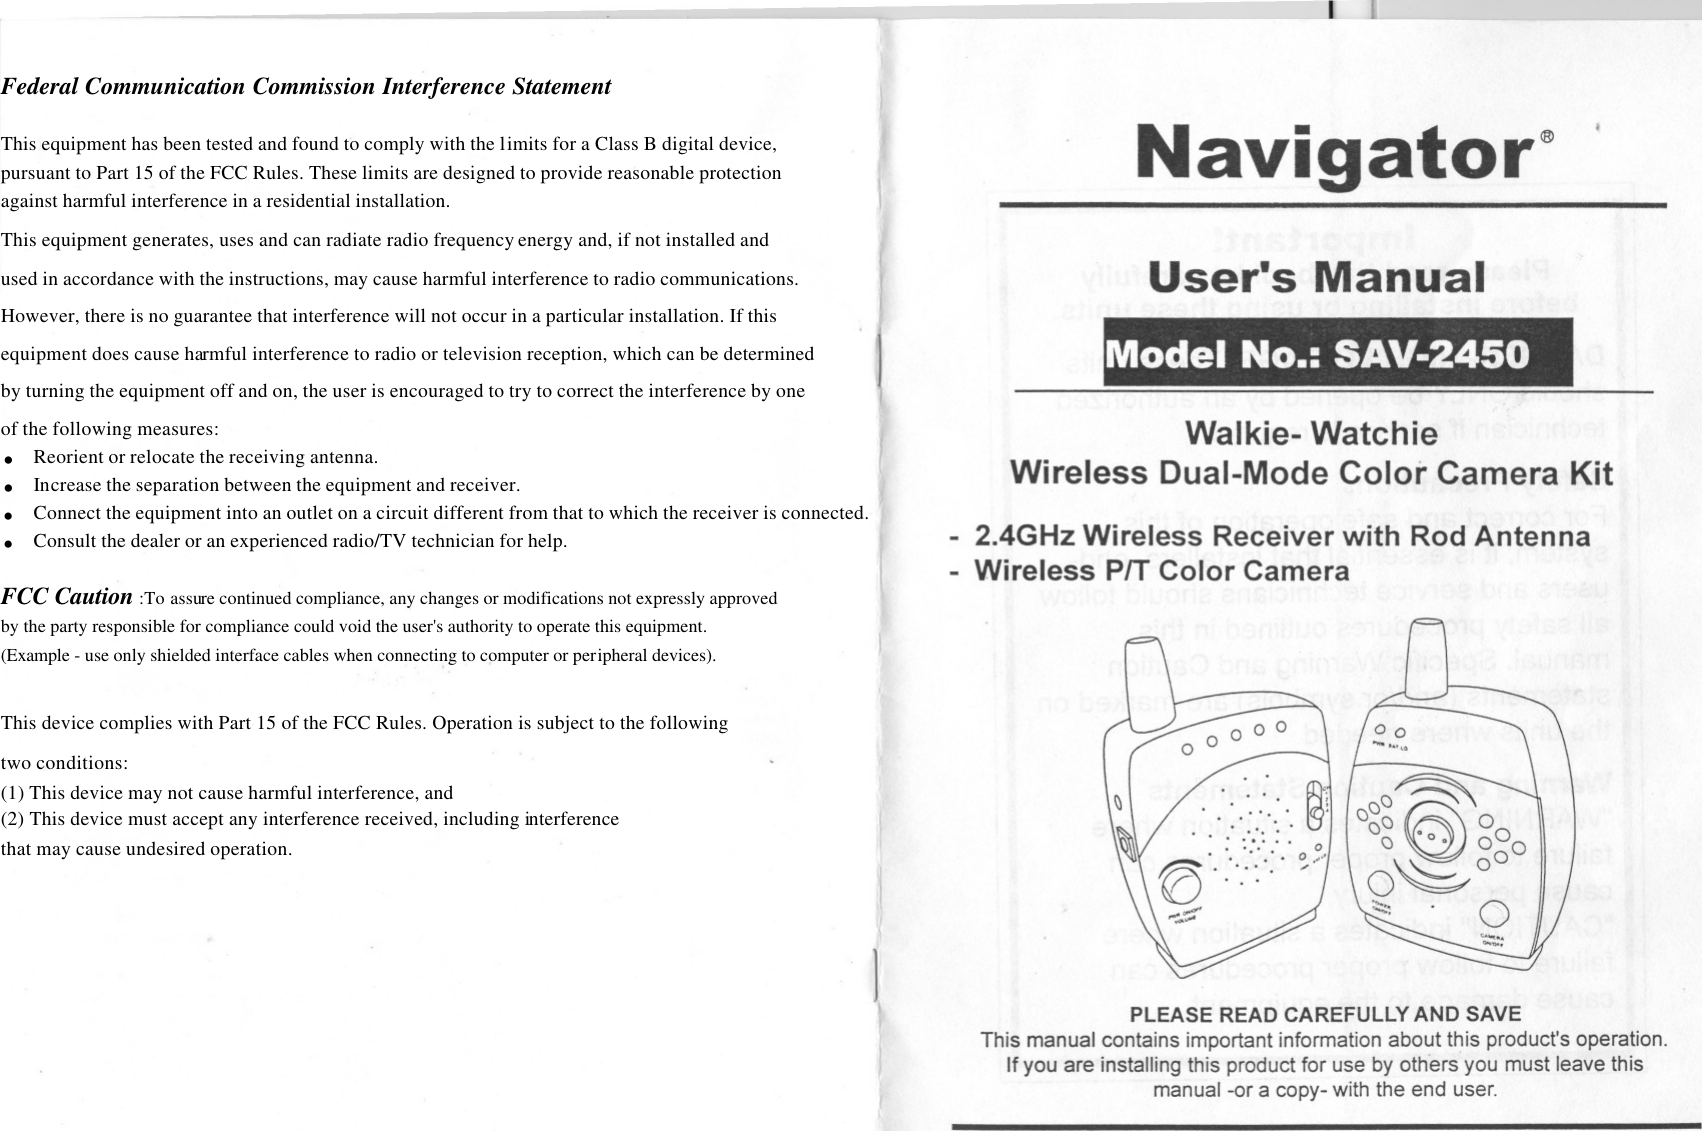 - - - -I-------- -[ It&quot;Navigator&quot;User&apos;s ManualModel No.: SAV-2450Walkie- WatchieWireless Dual-Mode Color Camera Kit.- 2.4GHz Wireless Receiver with Rod Antenna- Wireless PIT Color Camera!I)\f\f00&quot;&quot;&quot;&apos;uaaa~Q)~--- .aaa.O 0. 0°O~ooo 0PLEASE READ CAREFULLYAND SAVEThis manual contains important information about this product&apos;s operation.If you are installing this product for use by others you must leave thismanual -or a copy- with the end user.Federal Communication Commission Interference Statement  This equipment has been tested and found to comply with the limits for a Class B digital device,  pursuant to Part 15 of the FCC Rules. These limits are designed to provide reasonable protection  against harmful interference in a residential installation. This equipment generates, uses and can radiate radio frequency energy and, if not installed and  used in accordance with the instructions, may cause harmful interference to radio communications.  However, there is no guarantee that interference will not occur in a particular installation. If this  equipment does cause harmful interference to radio or television reception, which can be determined  by turning the equipment off and on, the user is encouraged to try to correct the interference by one  of the following measures: . Reorient or relocate the receiving antenna. . Increase the separation between the equipment and receiver. . Connect the equipment into an outlet on a circuit different from that to which the receiver is connected. . Consult the dealer or an experienced radio/TV technician for help.  FCC Caution :To assure continued compliance, any changes or modifications not expressly approved  by the party responsible for compliance could void the user&apos;s authority to operate this equipment.  (Example - use only shielded interface cables when connecting to computer or peripheral devices).  This device complies with Part 15 of the FCC Rules. Operation is subject to the following  two conditions: (1) This device may not cause harmful interference, and  (2) This device must accept any interference received, including interference  that may cause undesired operation.    